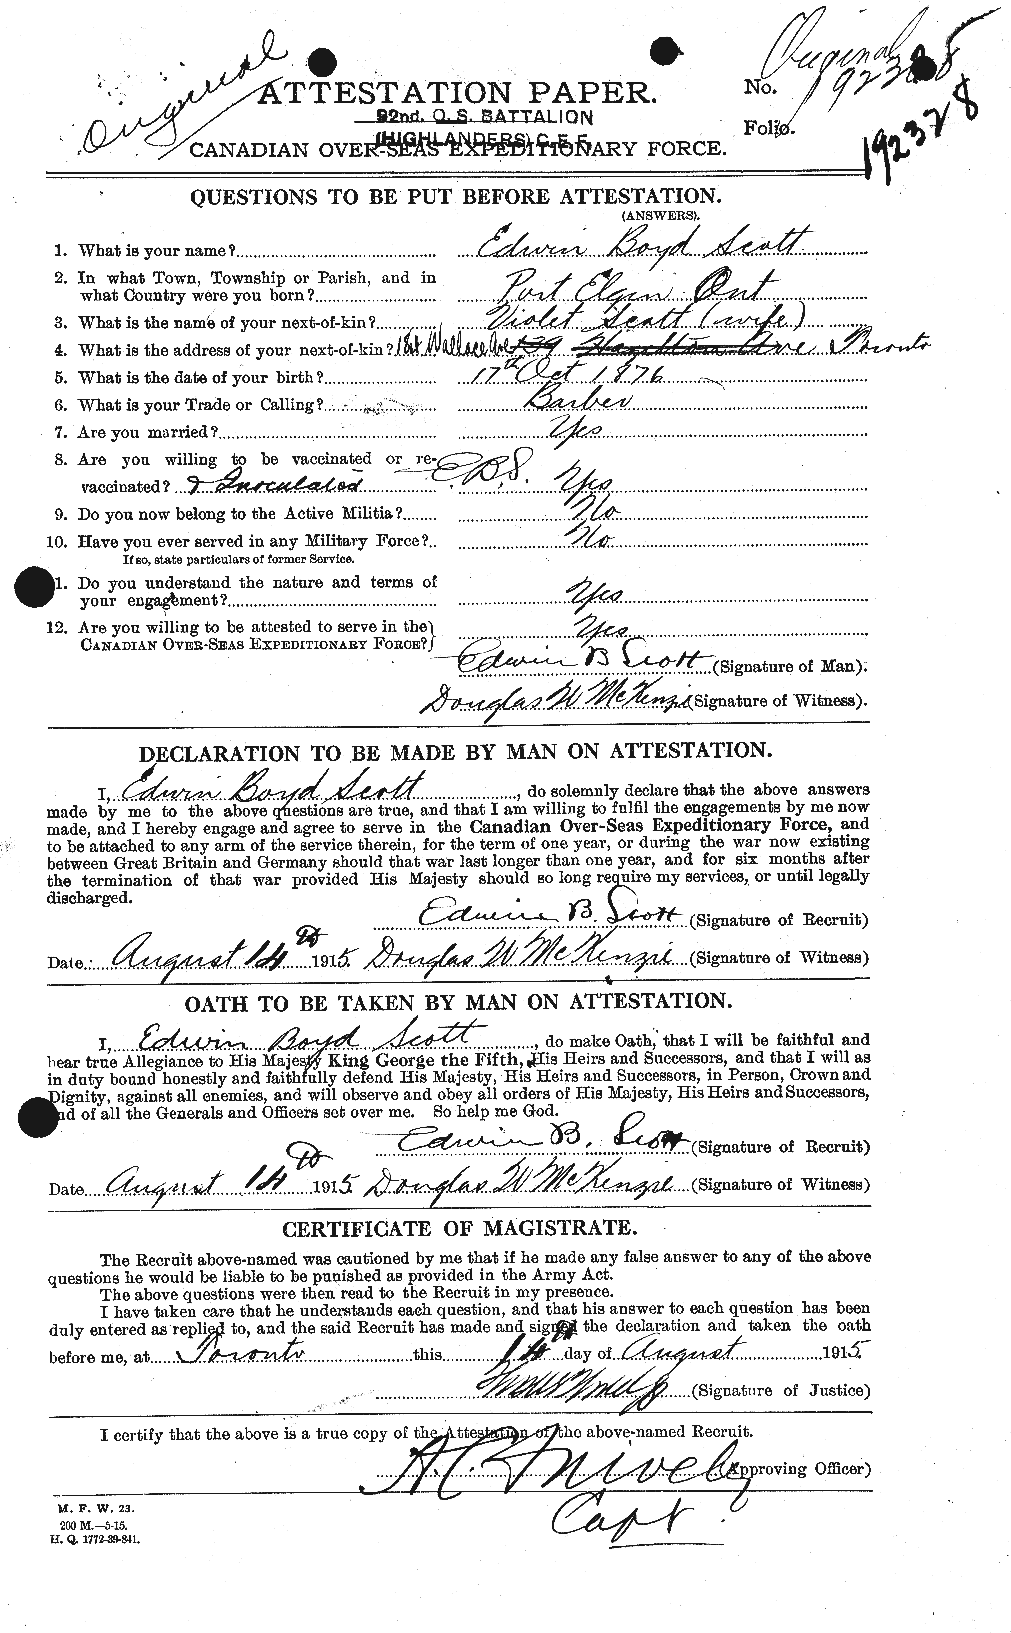 Personnel Records of the First World War - CEF 085042a